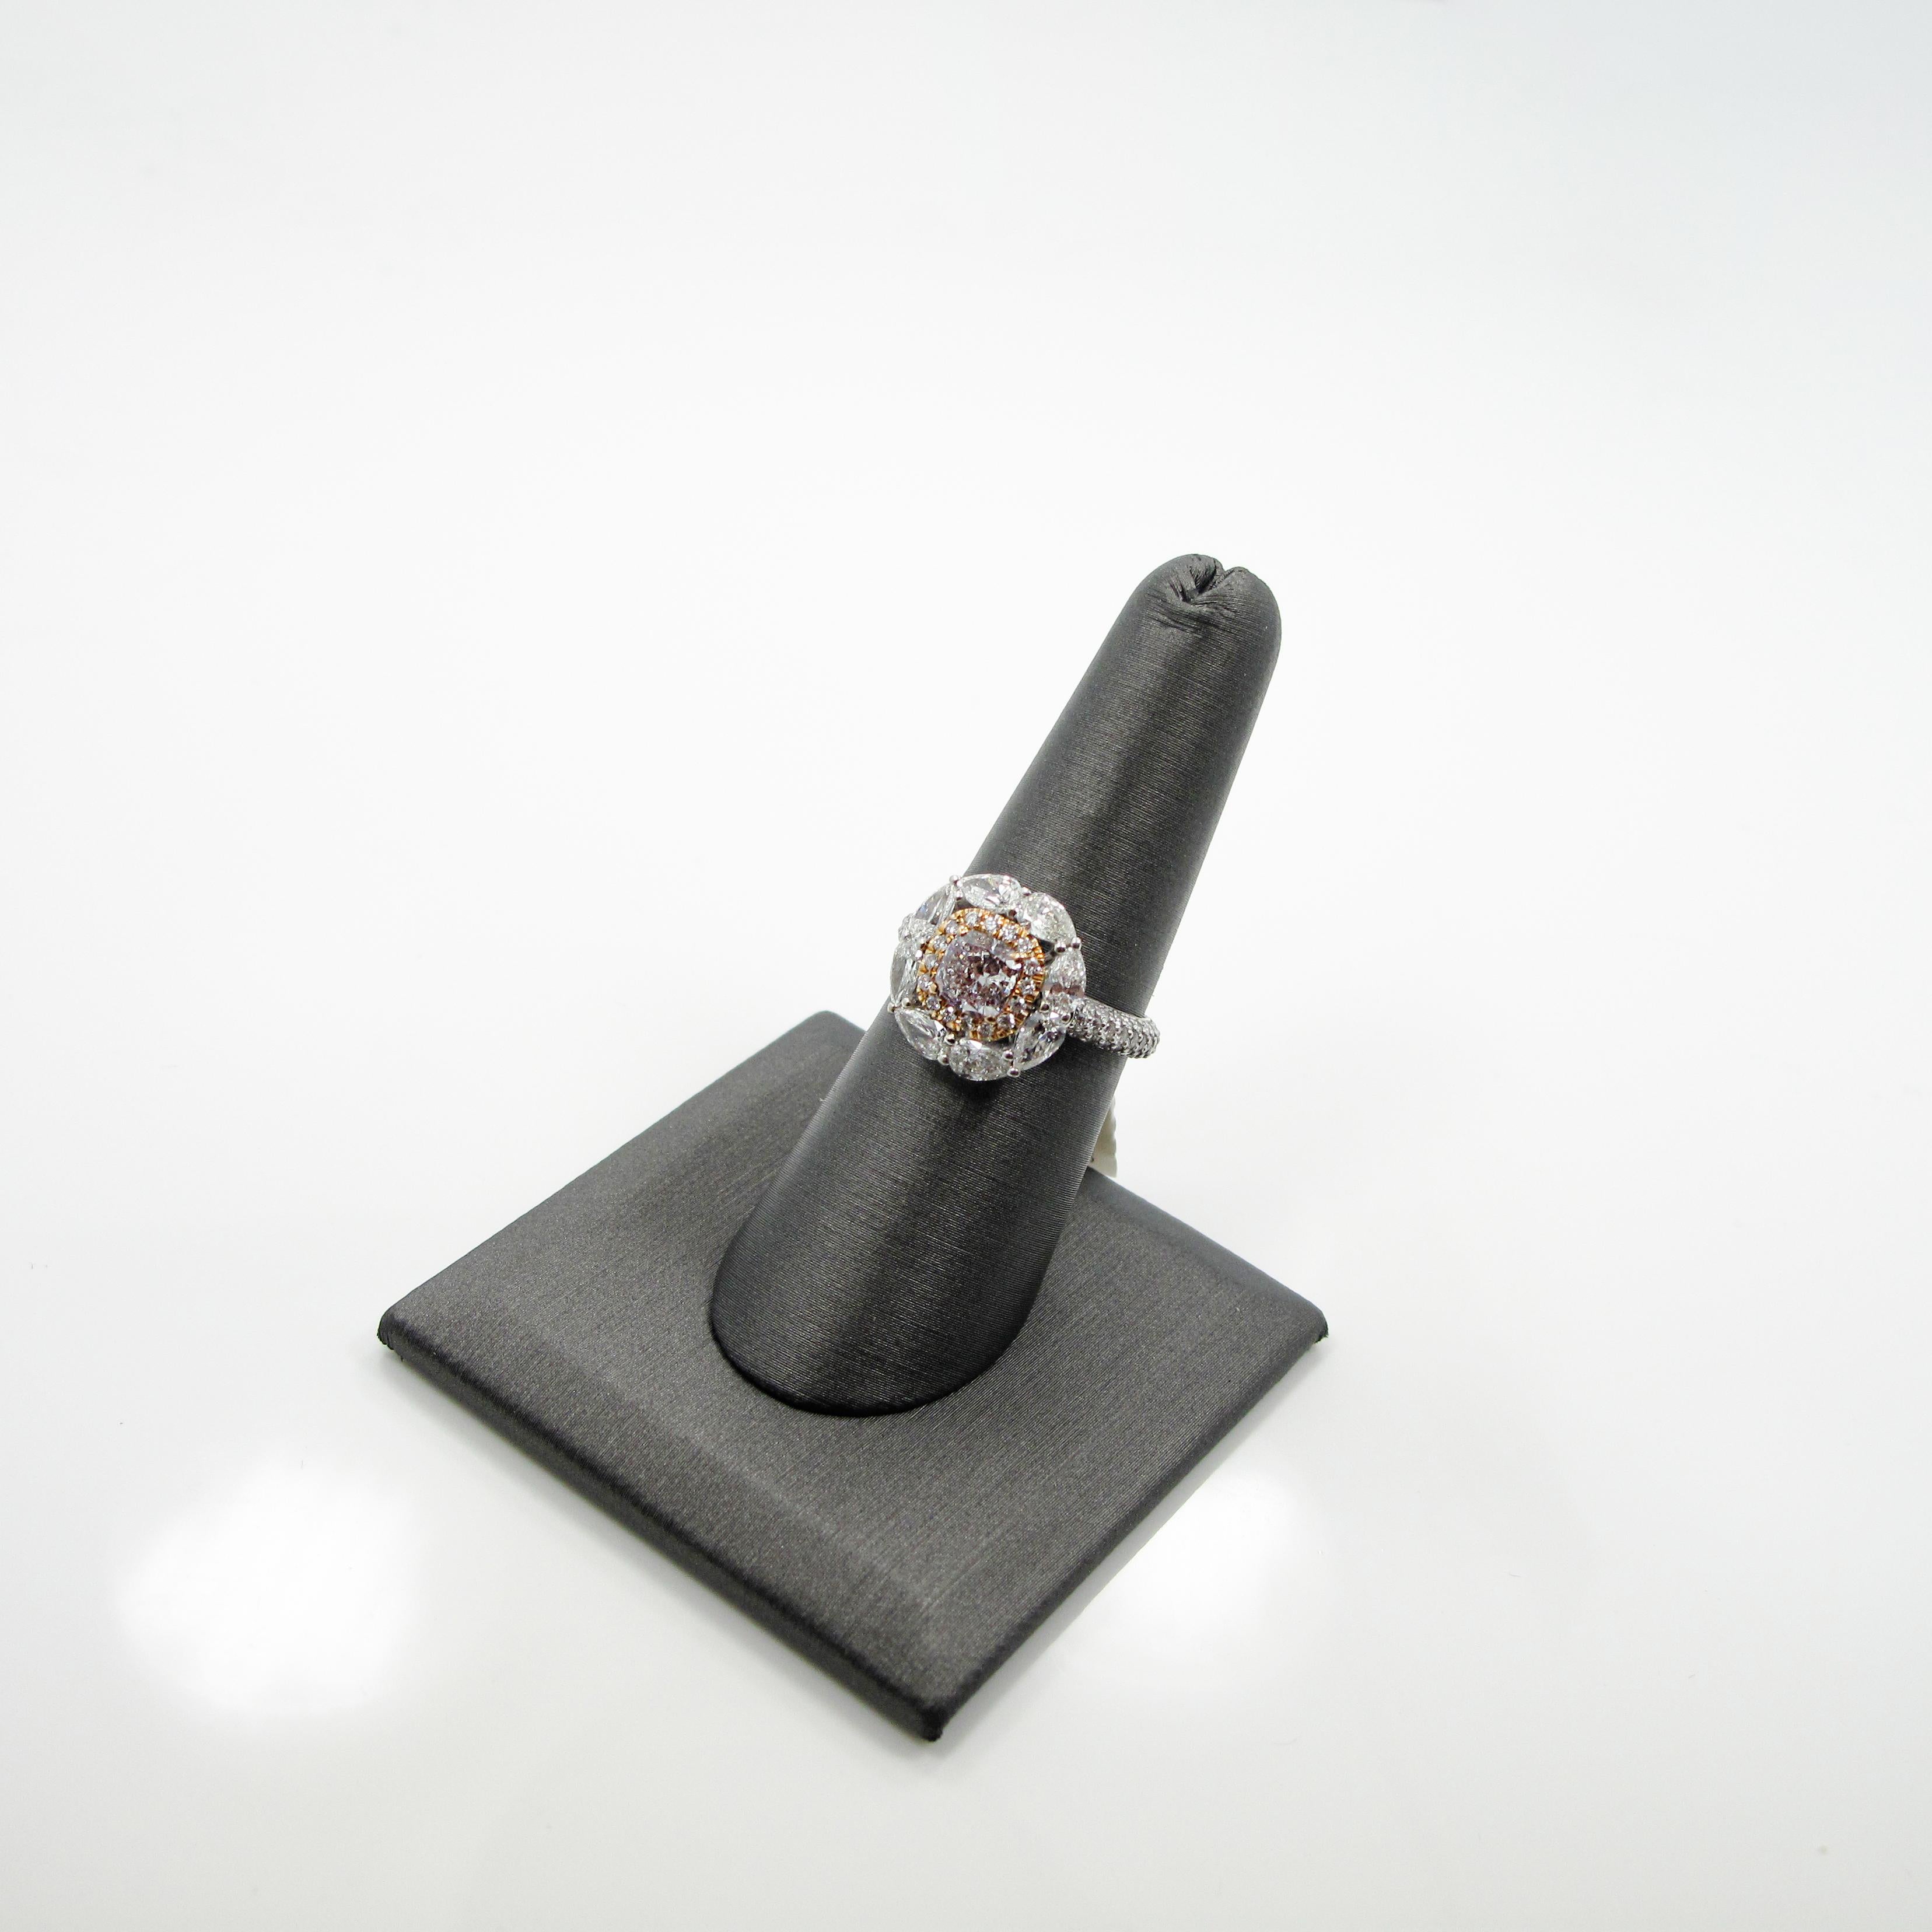 One 18k white gold and white and fancy diamond ring. The ring features a 1.00ct. faint pink cushion modified brilliant which measures 5.54x5.52x3.87mm and is accompanied by GIA certificate # 6197904266.  The diamond is set in an 18k rose gold basket